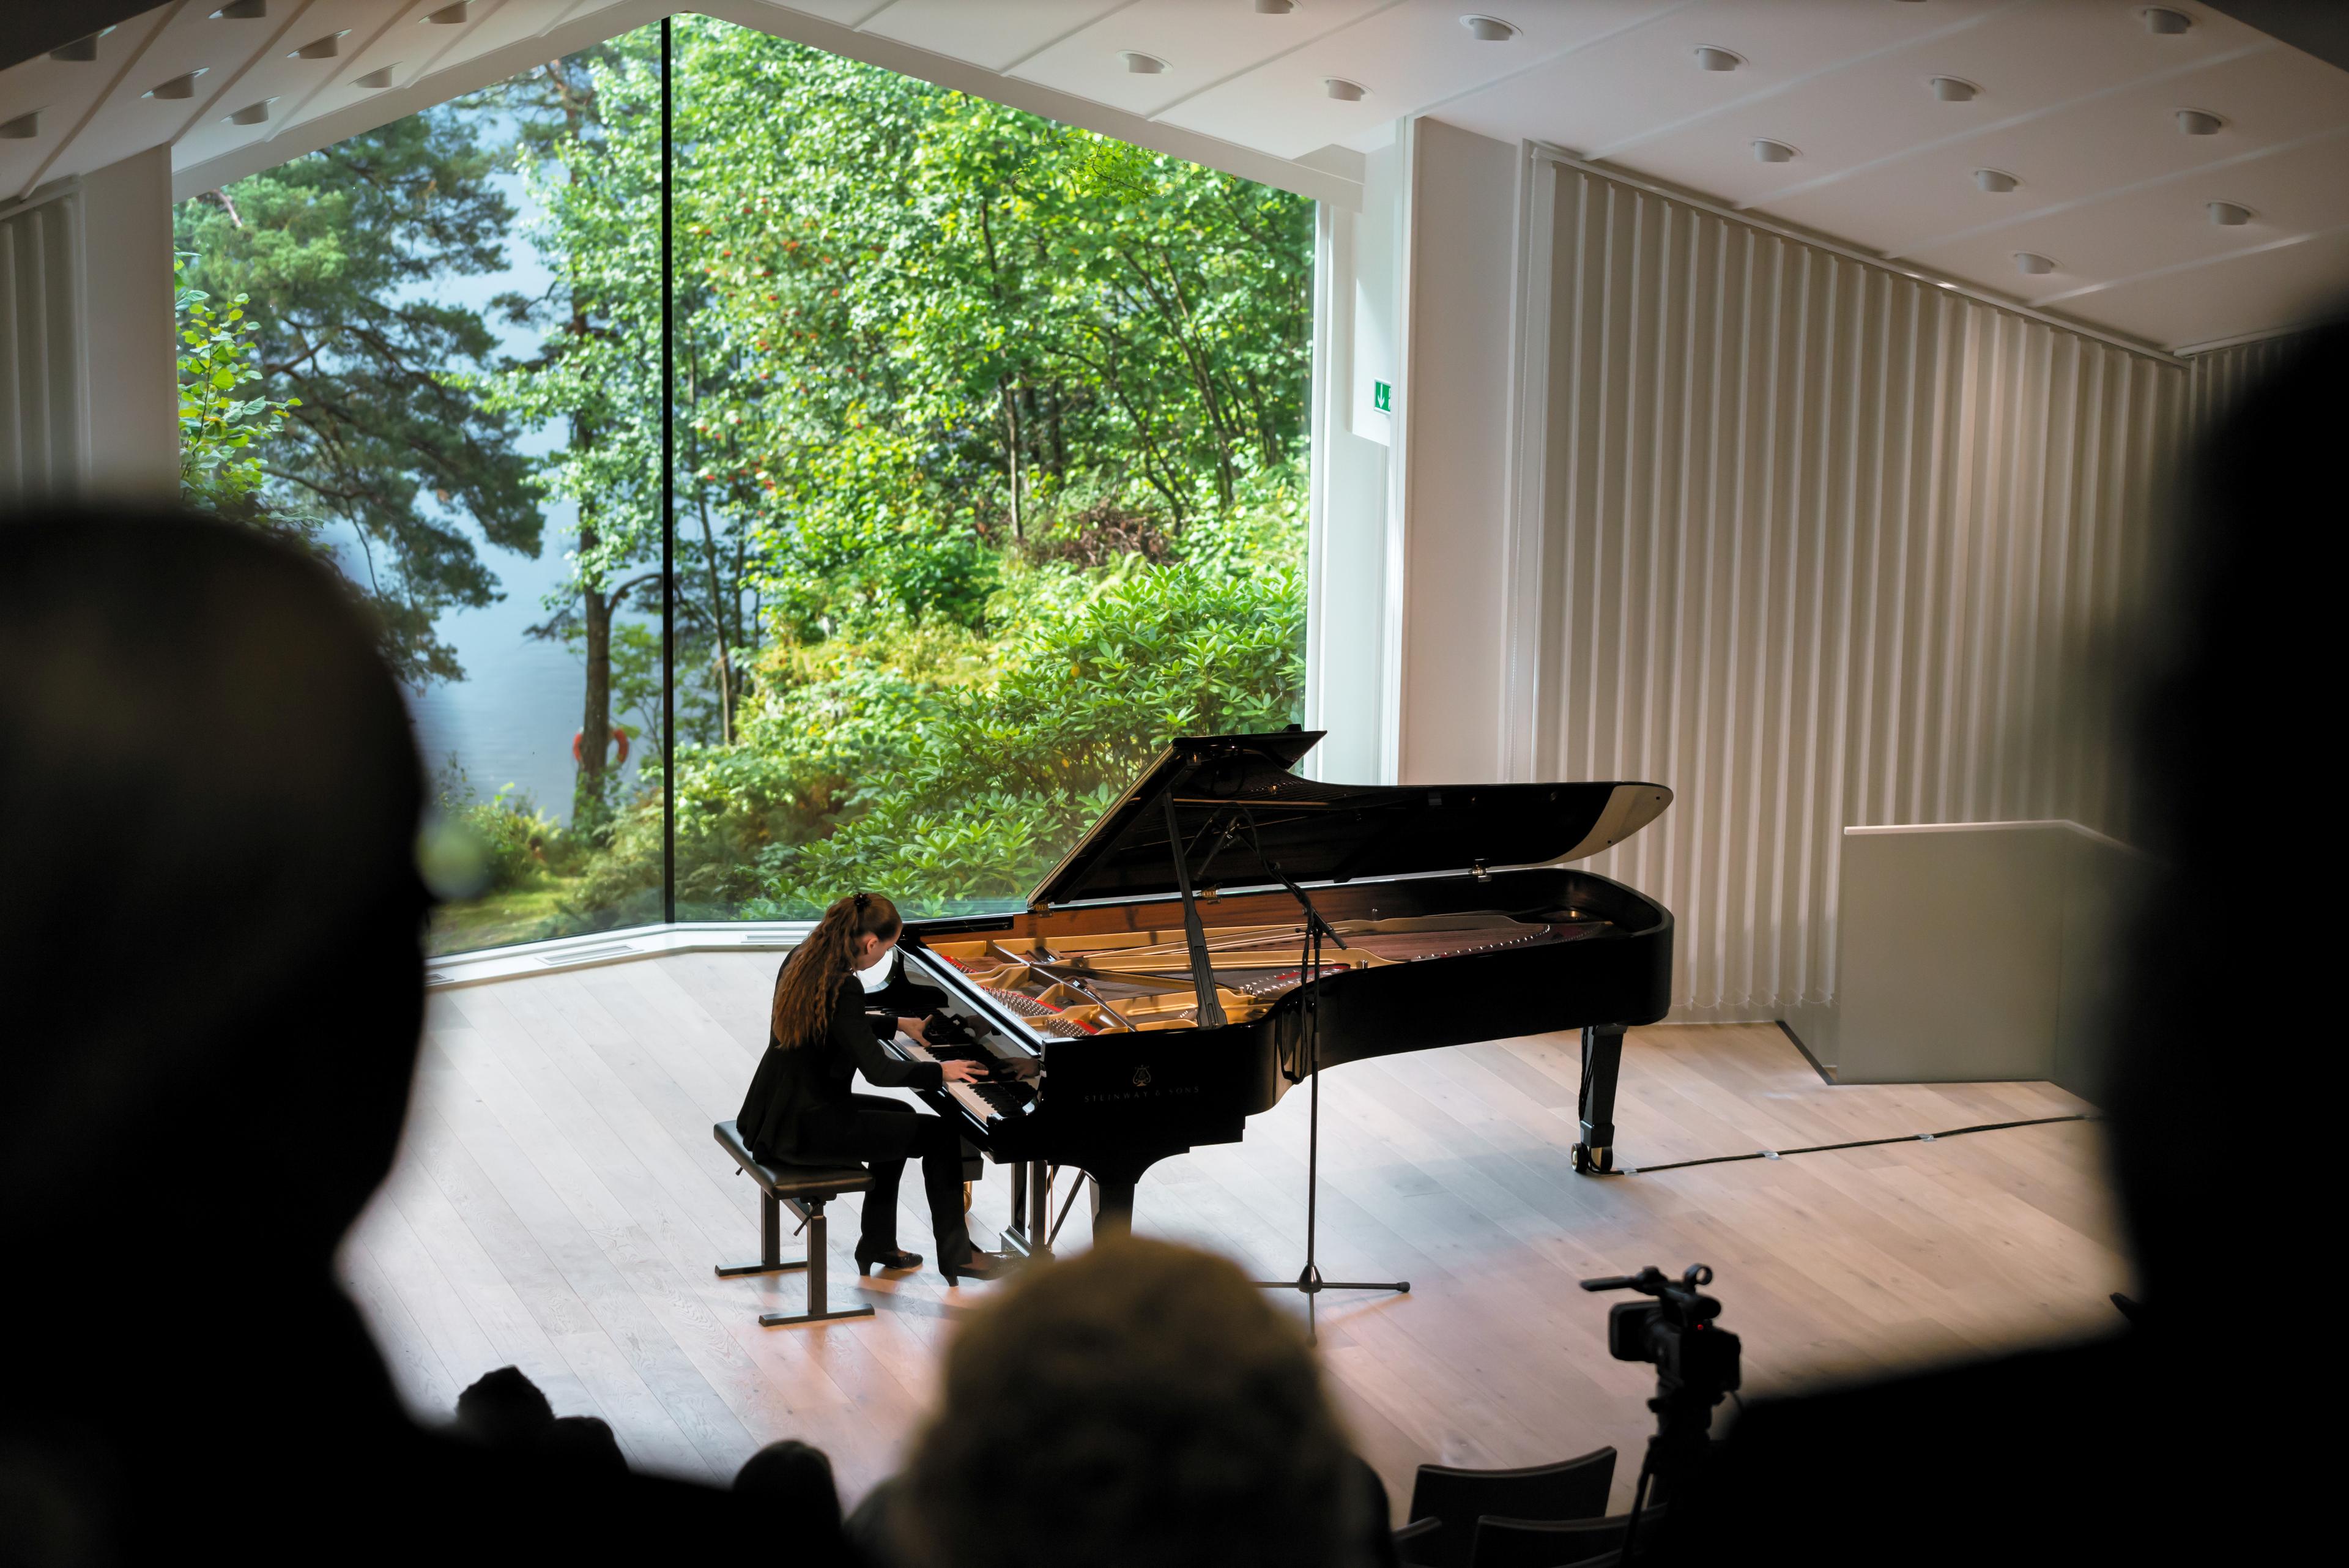 A pianist performing in the concert hall, with audience in the front